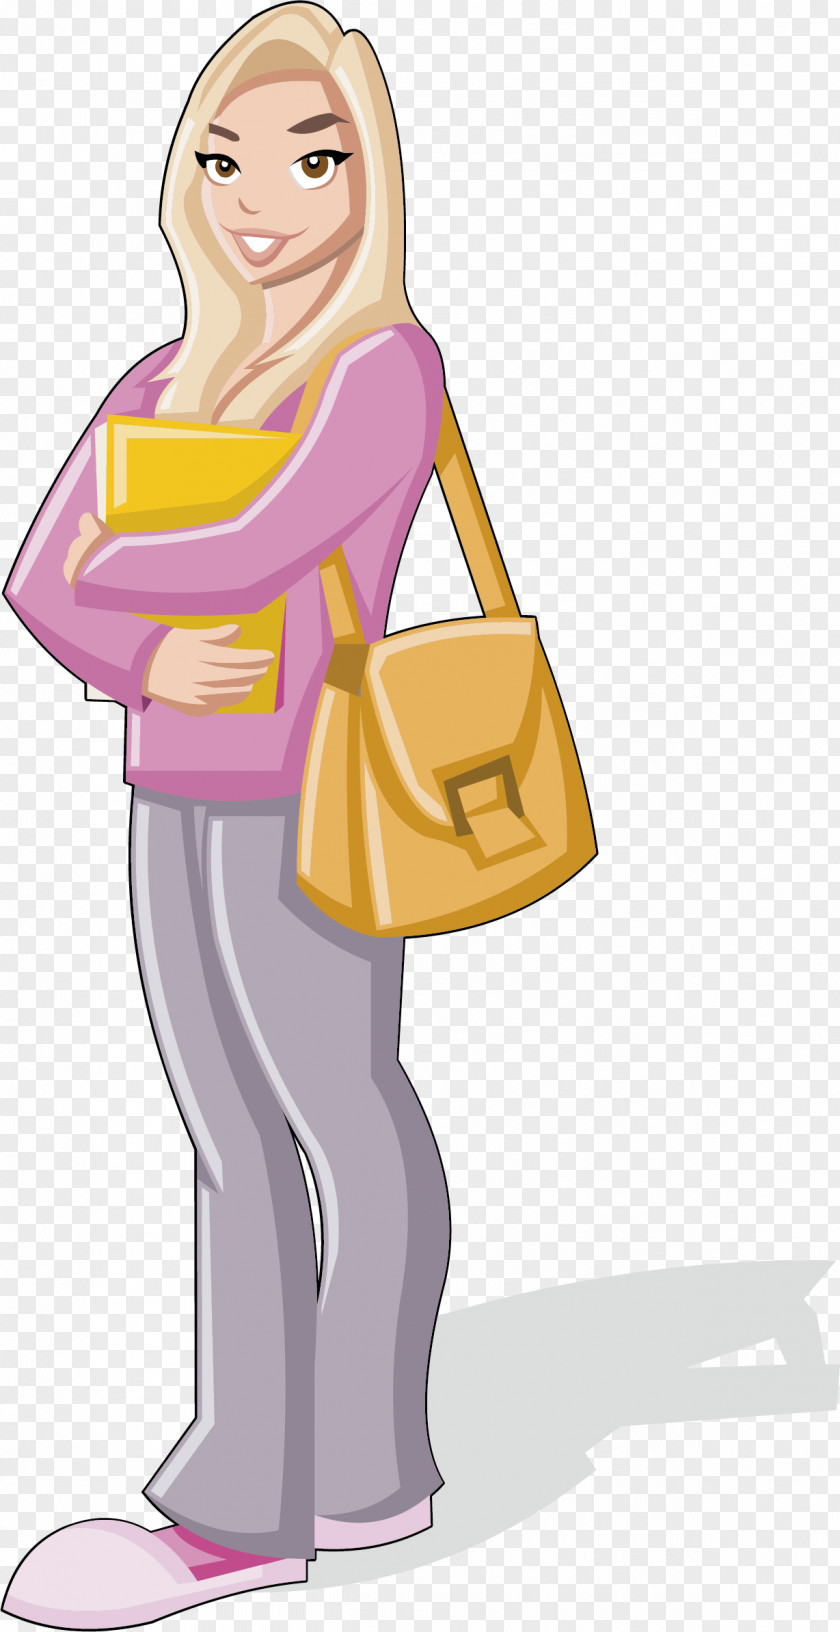 A Rich Woman Who Goes To School Student Cartoon Illustration PNG